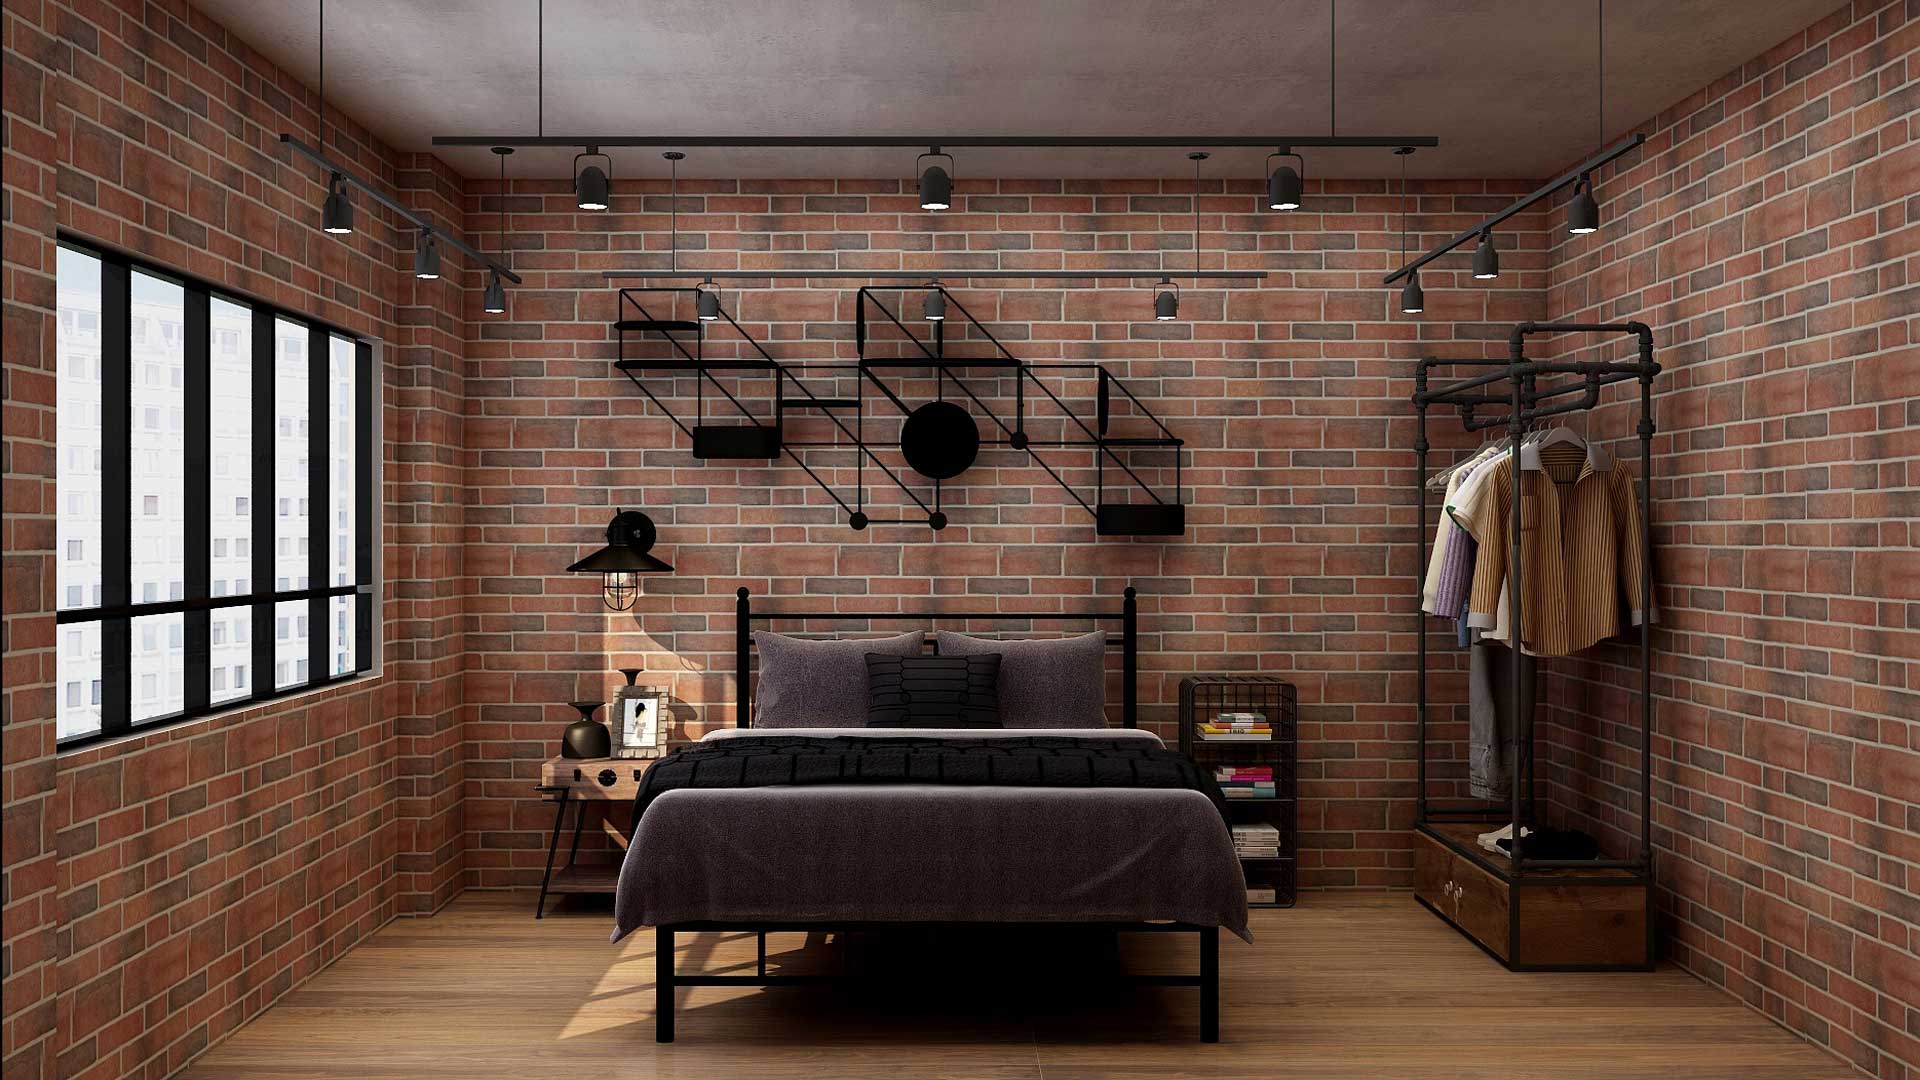 Industrial bedroom fully enclosed in brick walls, black track lights, and garment rack made of rustic metal pipes